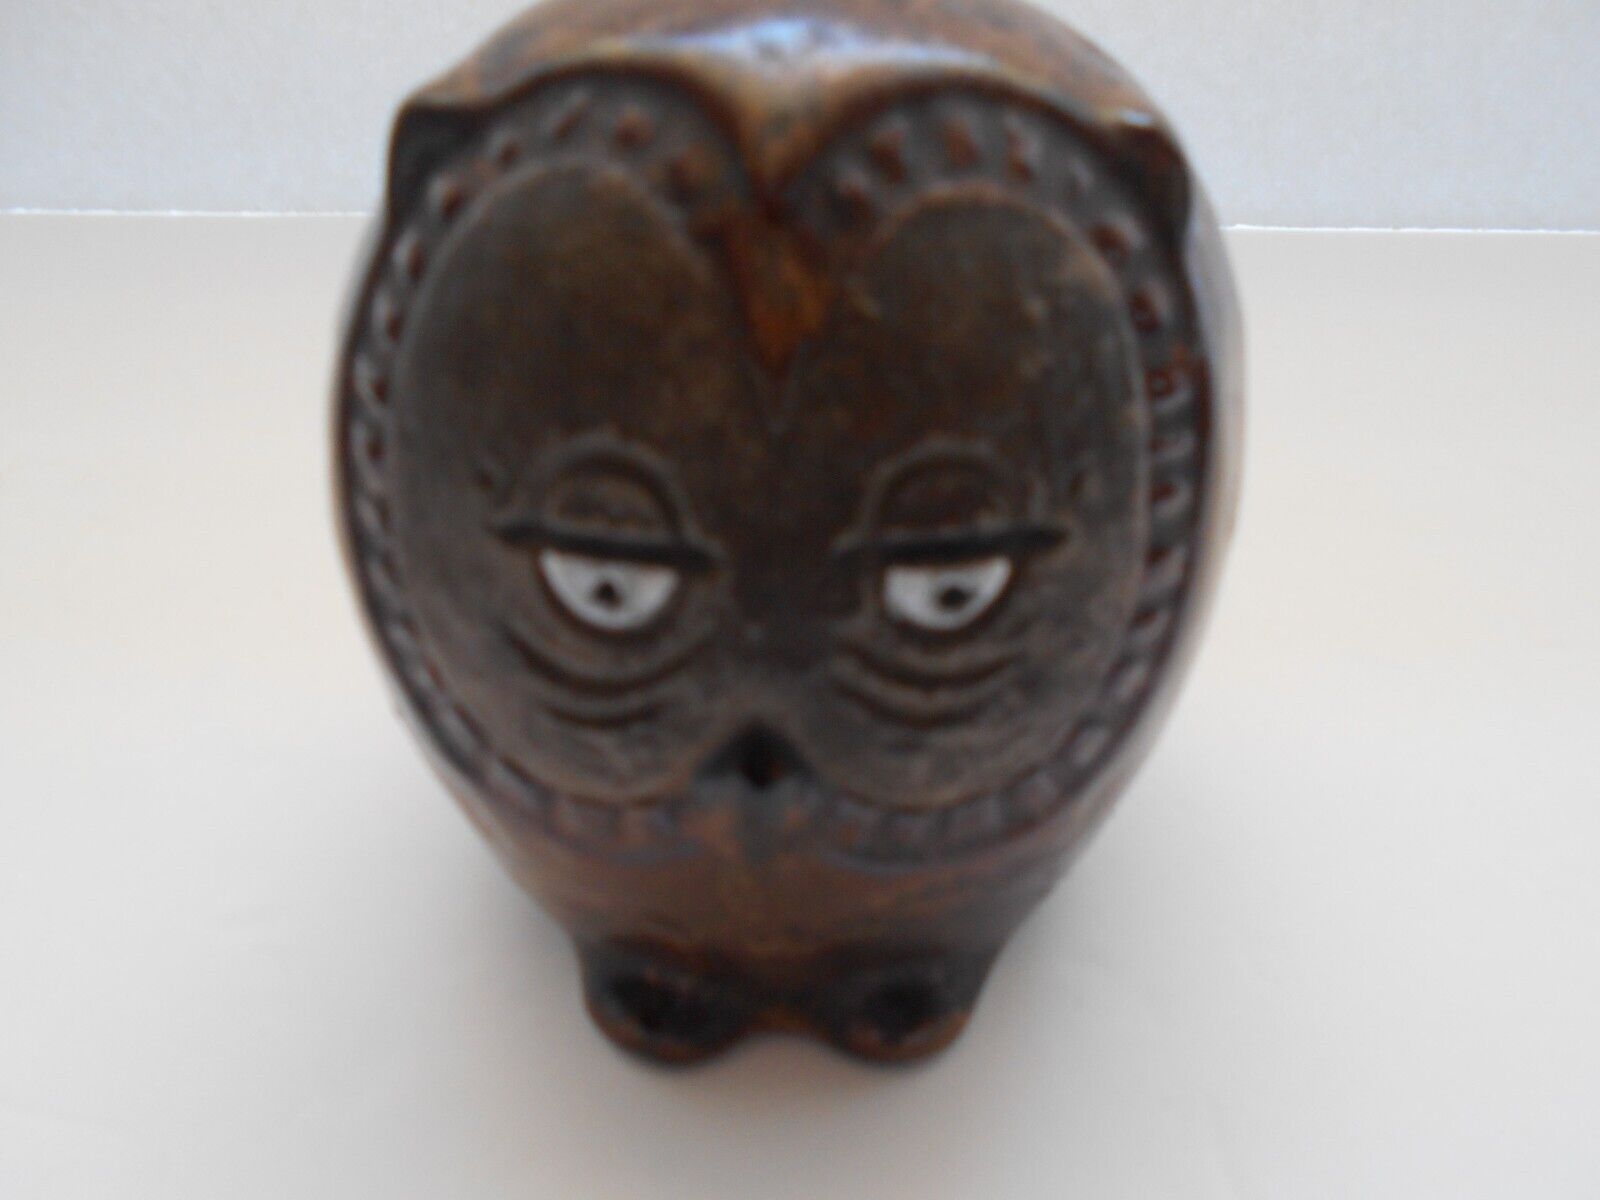 Vintage Owl stone ware cion bank, glazed, pottery brown in color. Made in Japan.